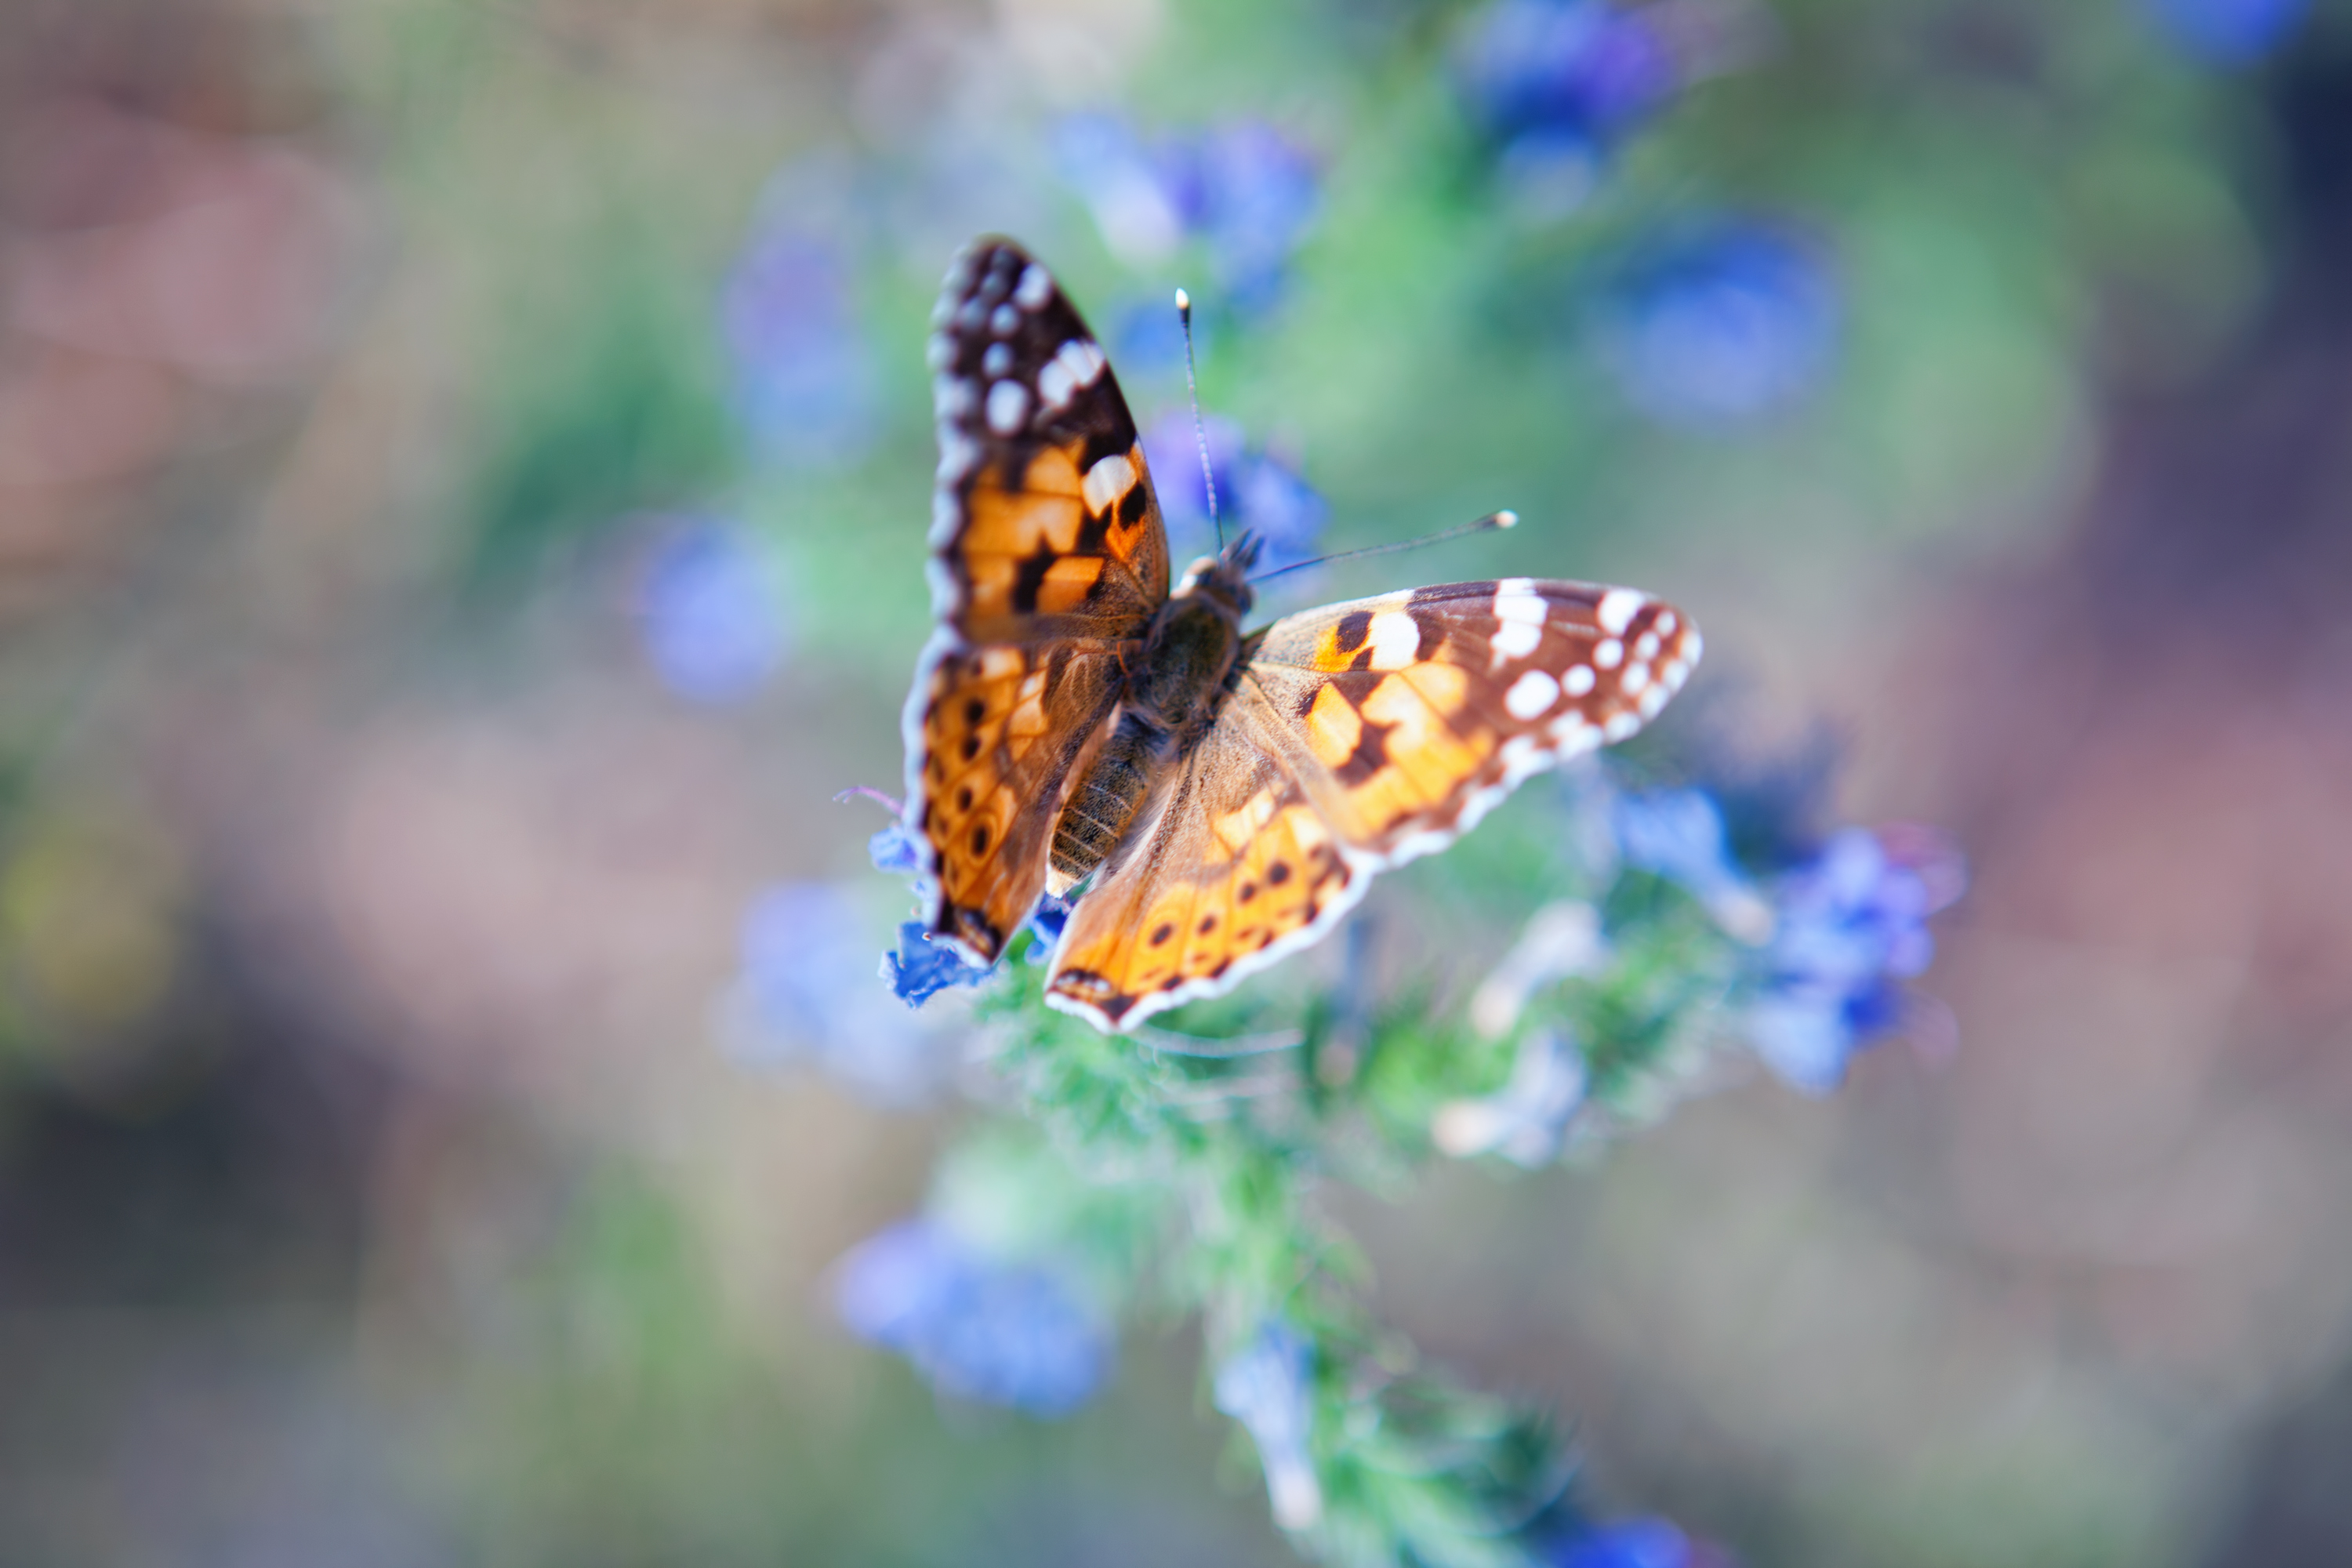 Butterfly on the flower, Animal, Green, Summer, Spring, HQ Photo